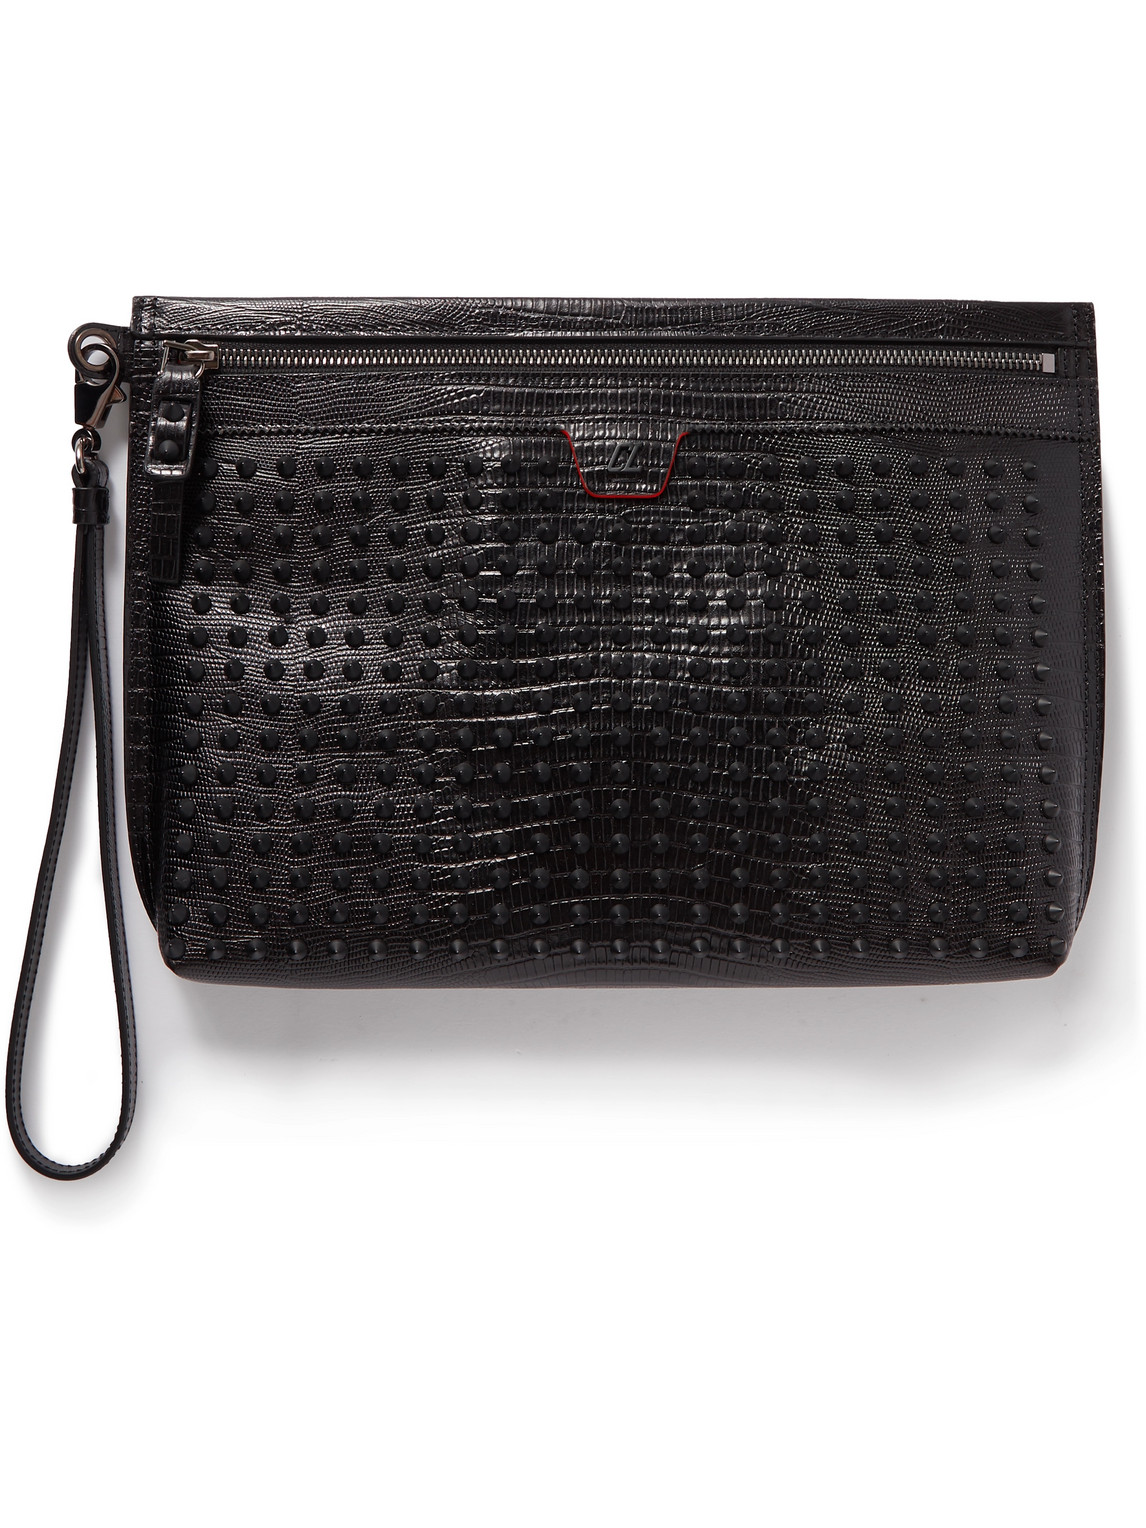 Christian Louboutin City Spiked Croc-effect Leather Pouch In Black